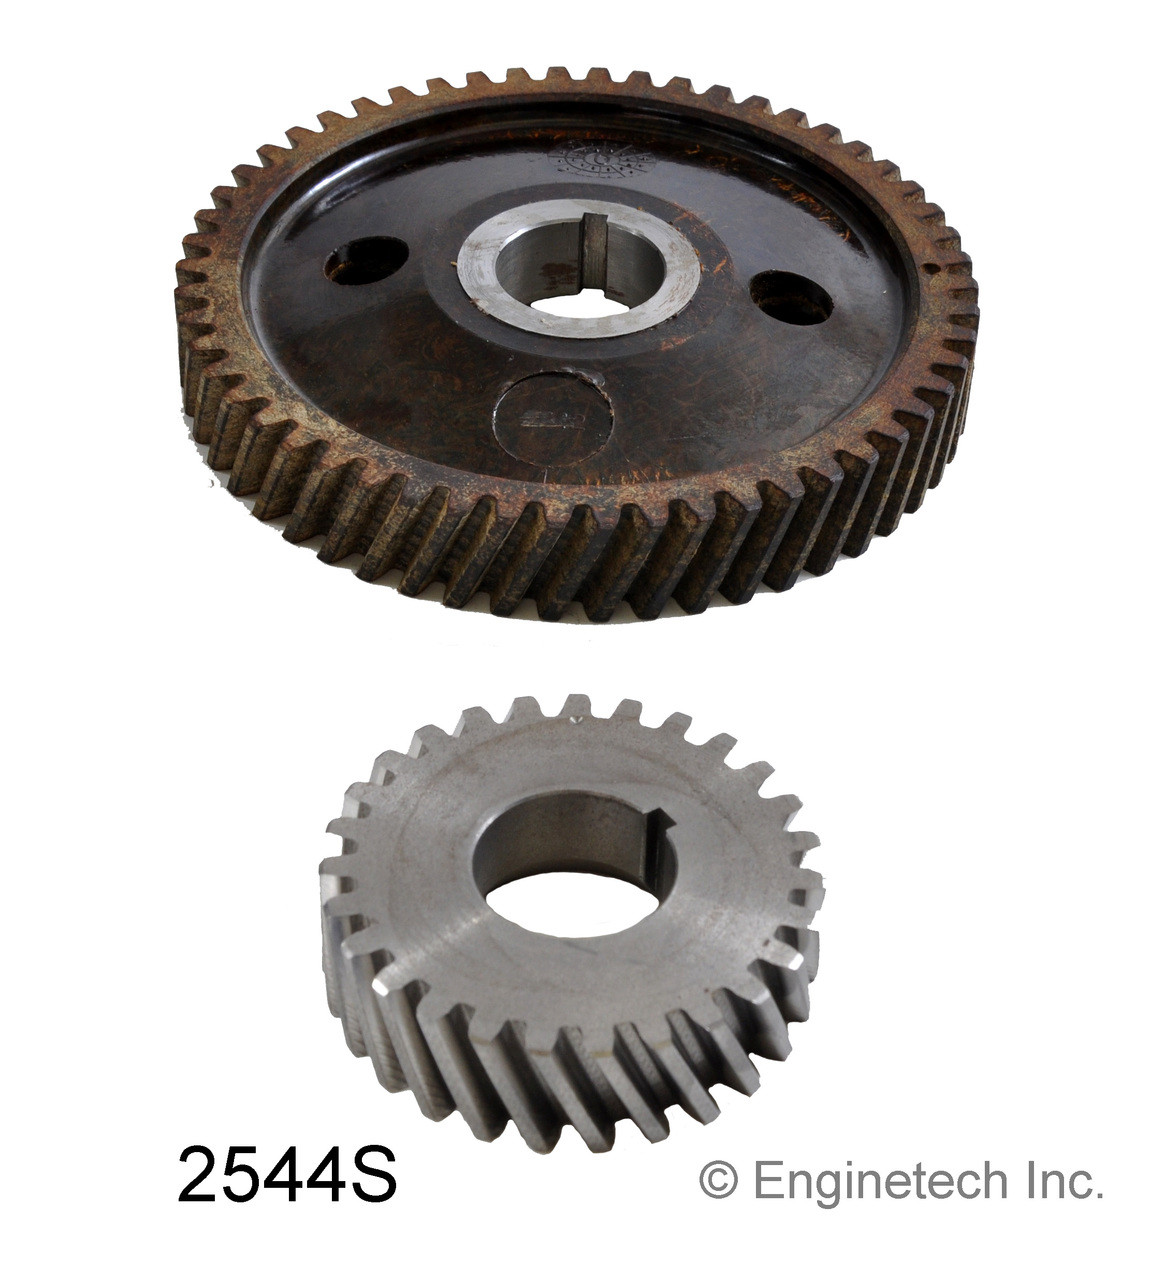 Timing Set - 1985 Buick Century 2.5L (2544S.A1)